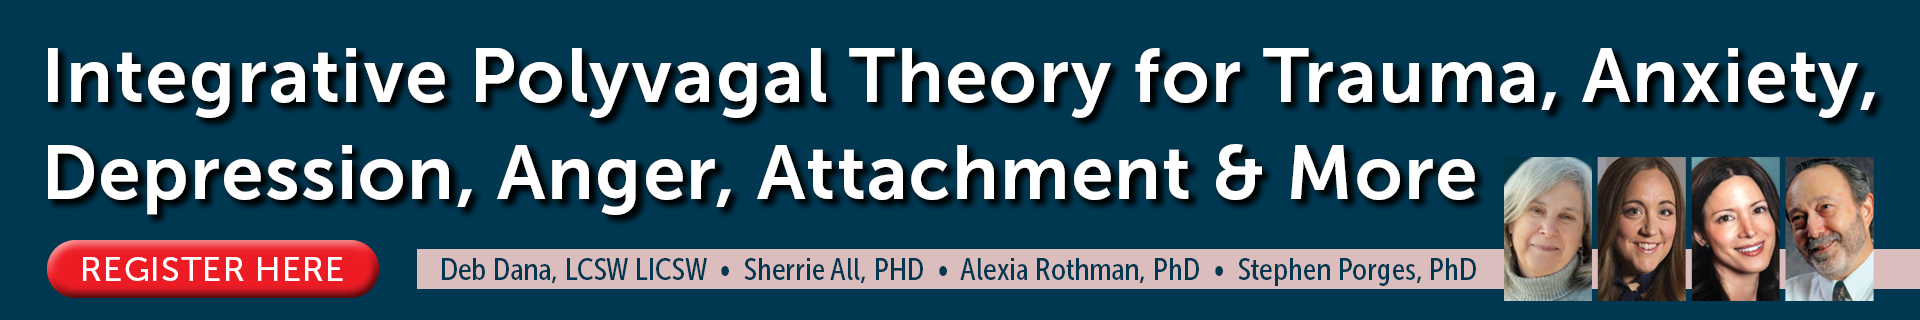 Integrative Polyvagal Theory for Trauma, Anxiety, Depression, Anger, Attachment & More